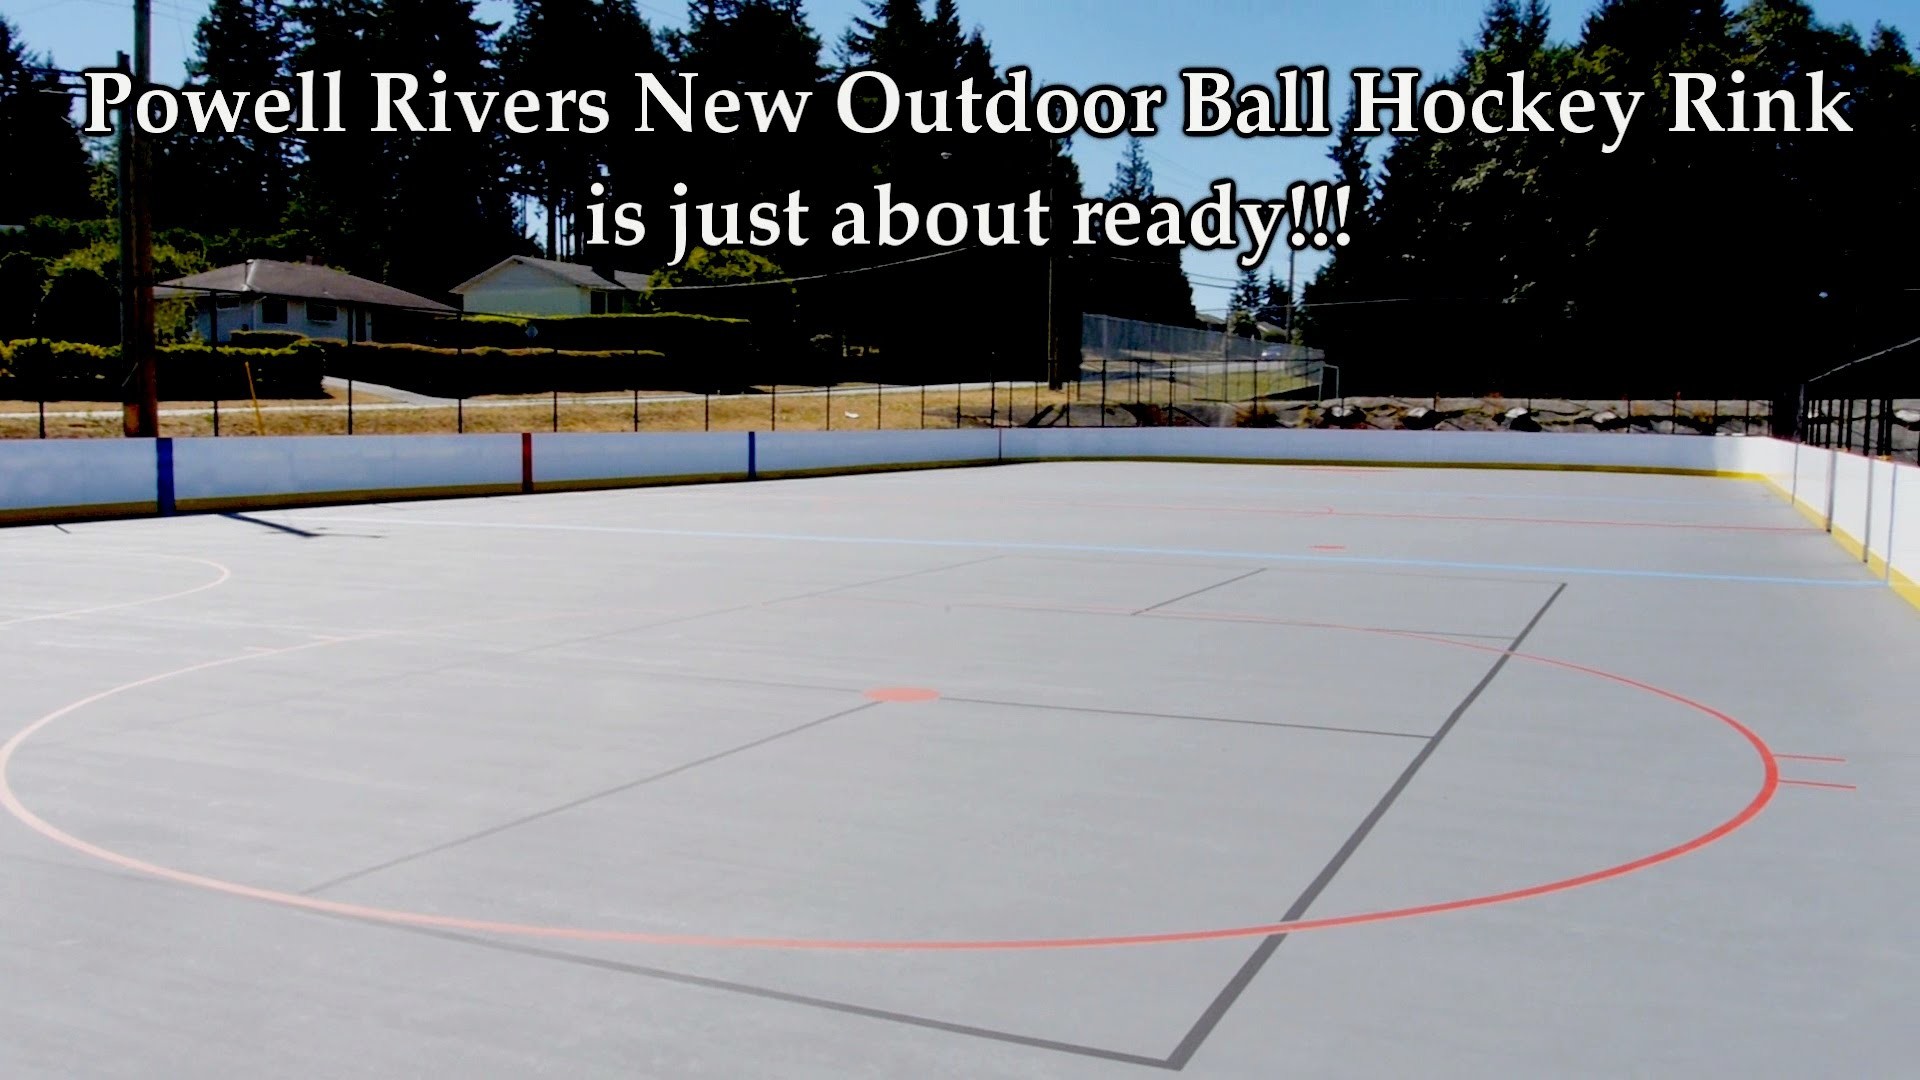 1920x1080 How To Build A New Outdoor Ball Hockey Arena (Powell River)